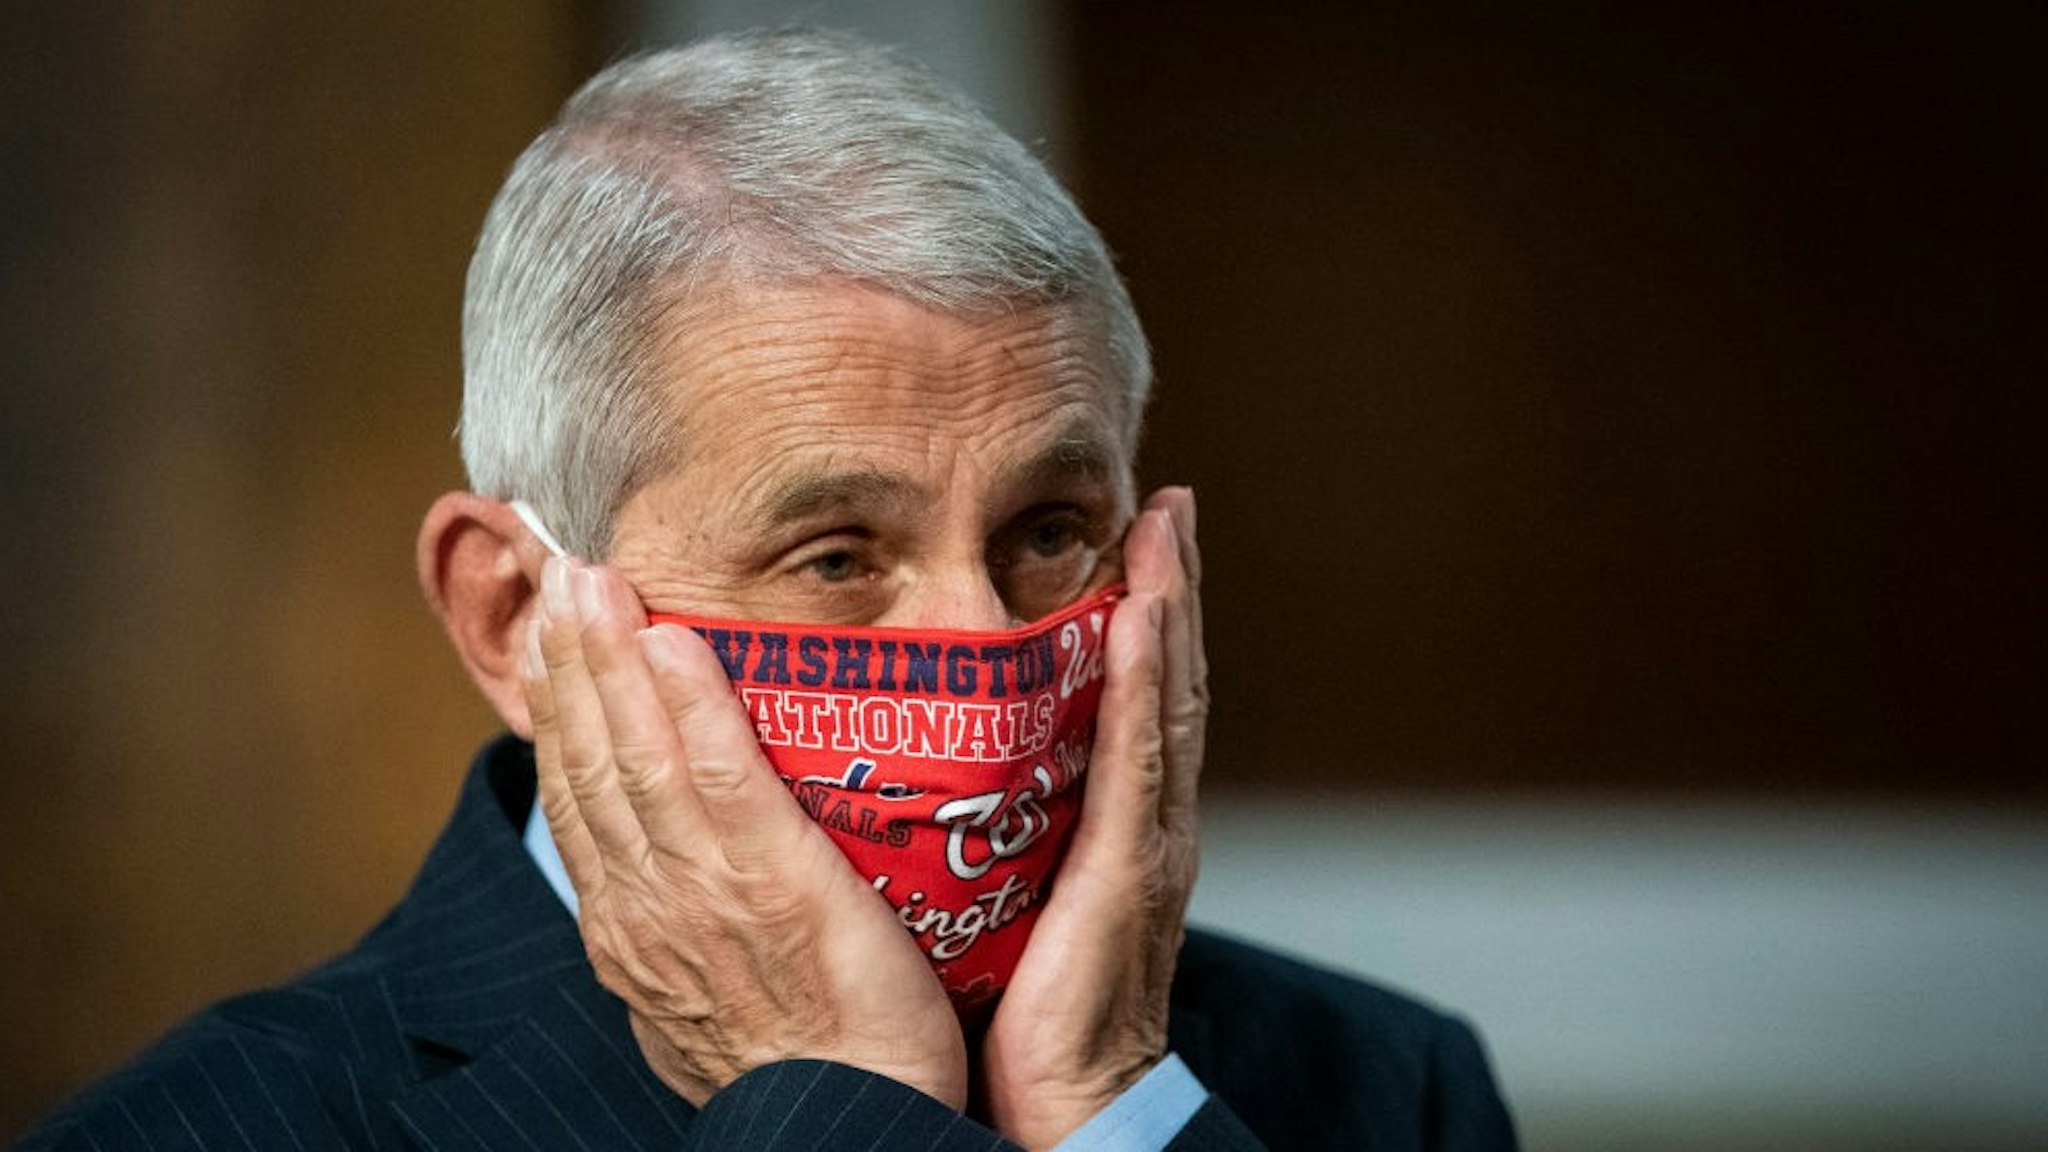 WASHINGTON, DC - JUNE 30: Anthony Fauci, director of the National Institute of Allergy and Infectious Diseases, adjusts a Washington Nationals protective mask while arriving to a Senate Health, Education, Labor and Pensions Committee hearing on June 30, 2020 in Washington, DC. Top federal health officials are expected to discuss efforts to get back to work and school during the coronavirus pandemic. (Photo by